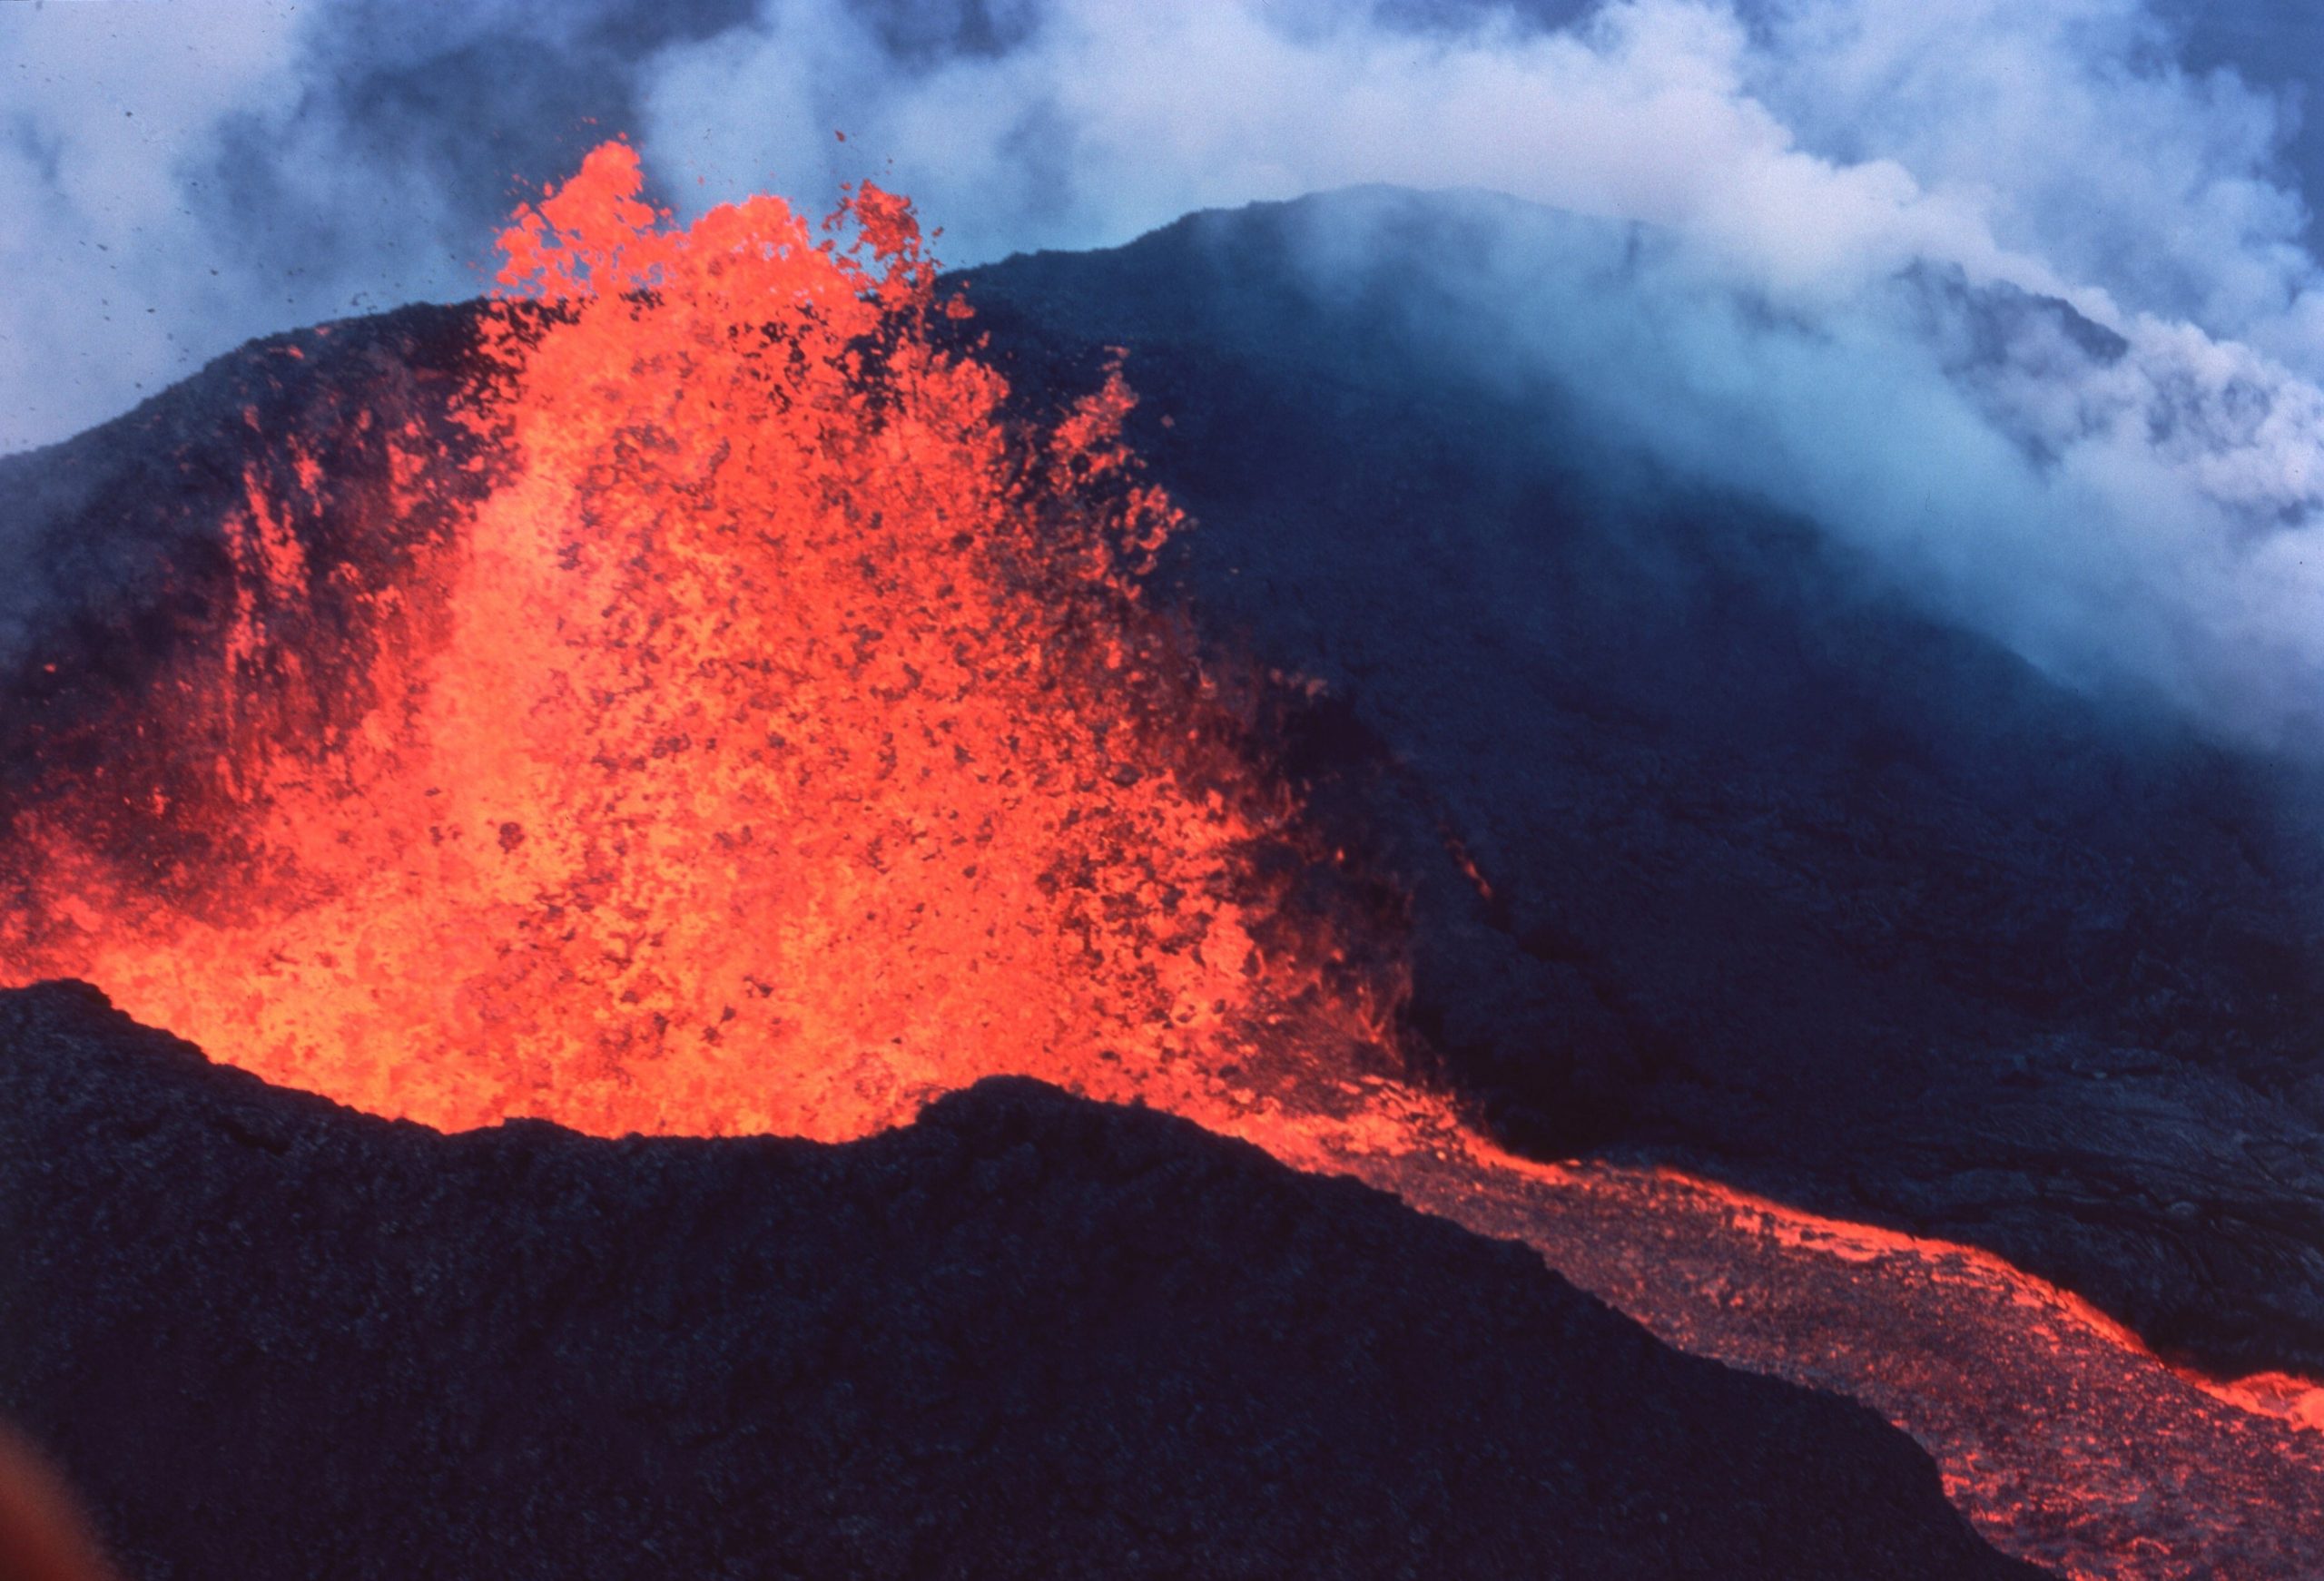 World’s largest volcano erupting for first time in Hawaii